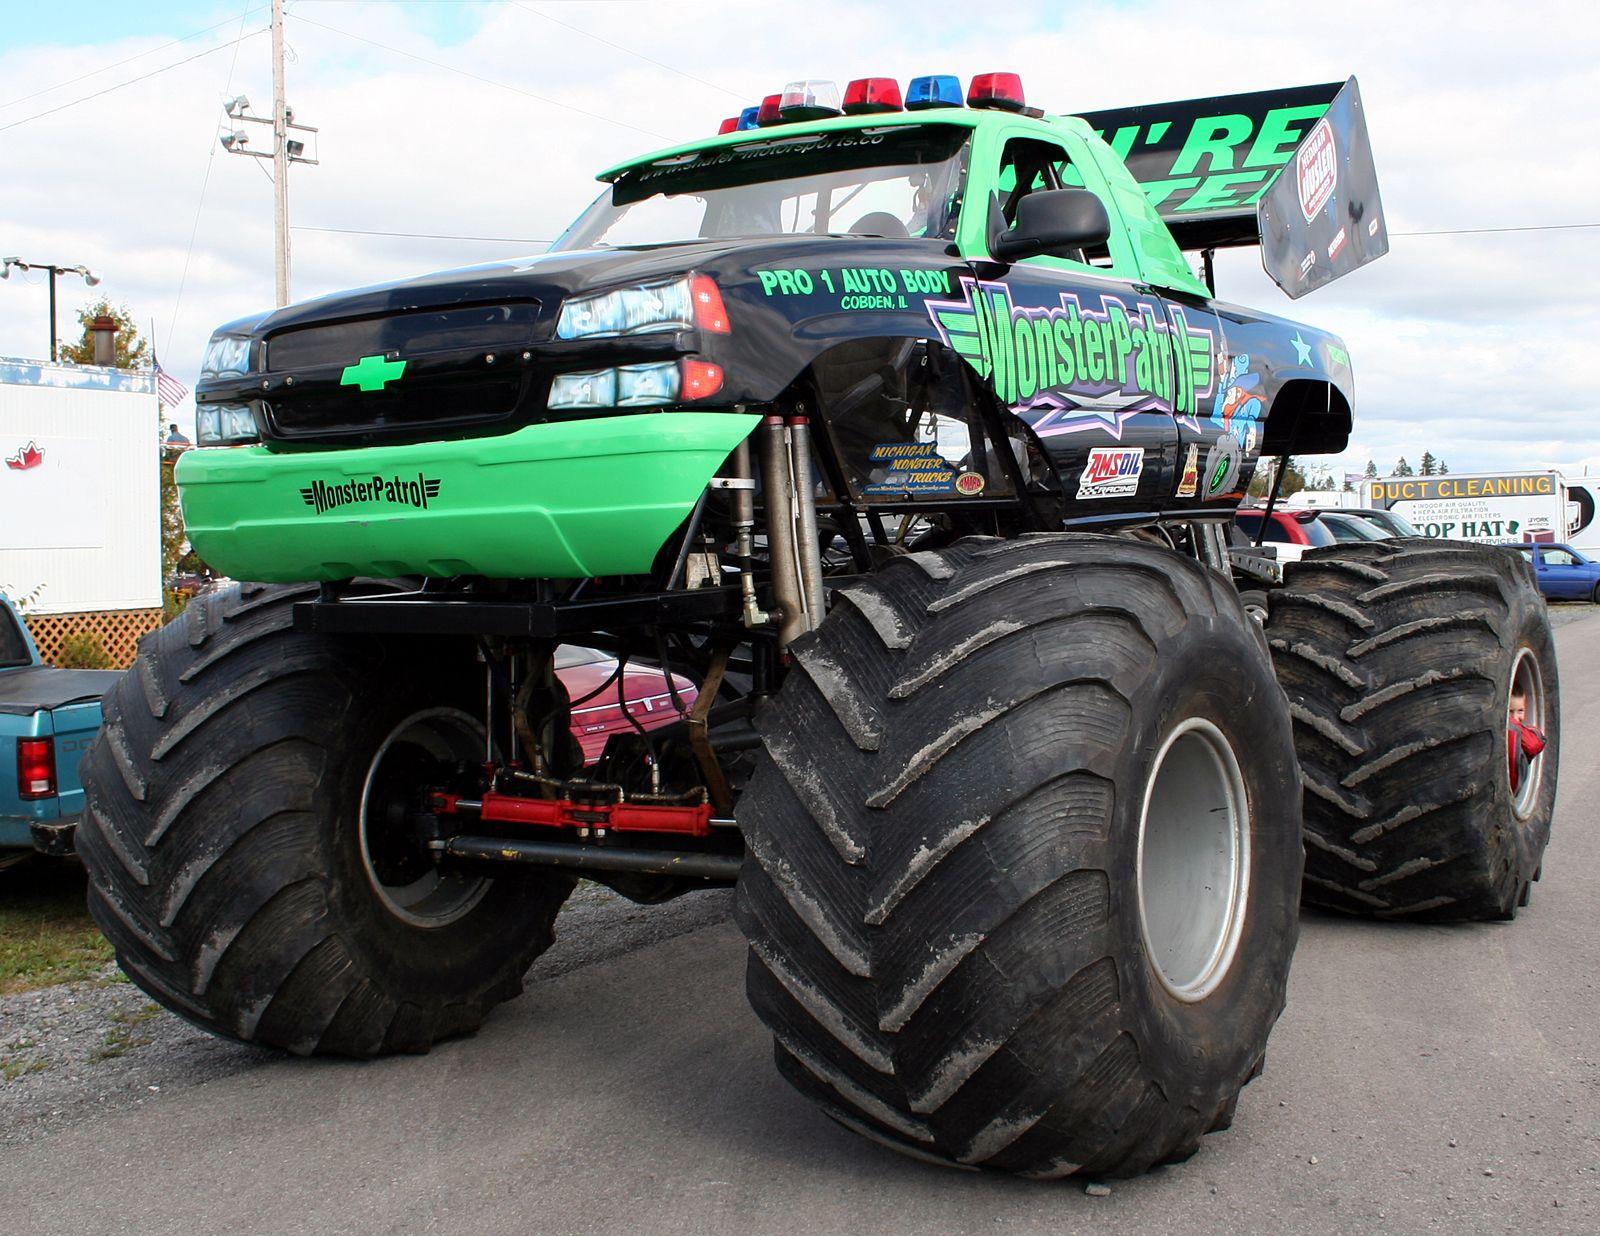 Monster Truck Awesome High Quality HD Wallpaper. Monster Truck